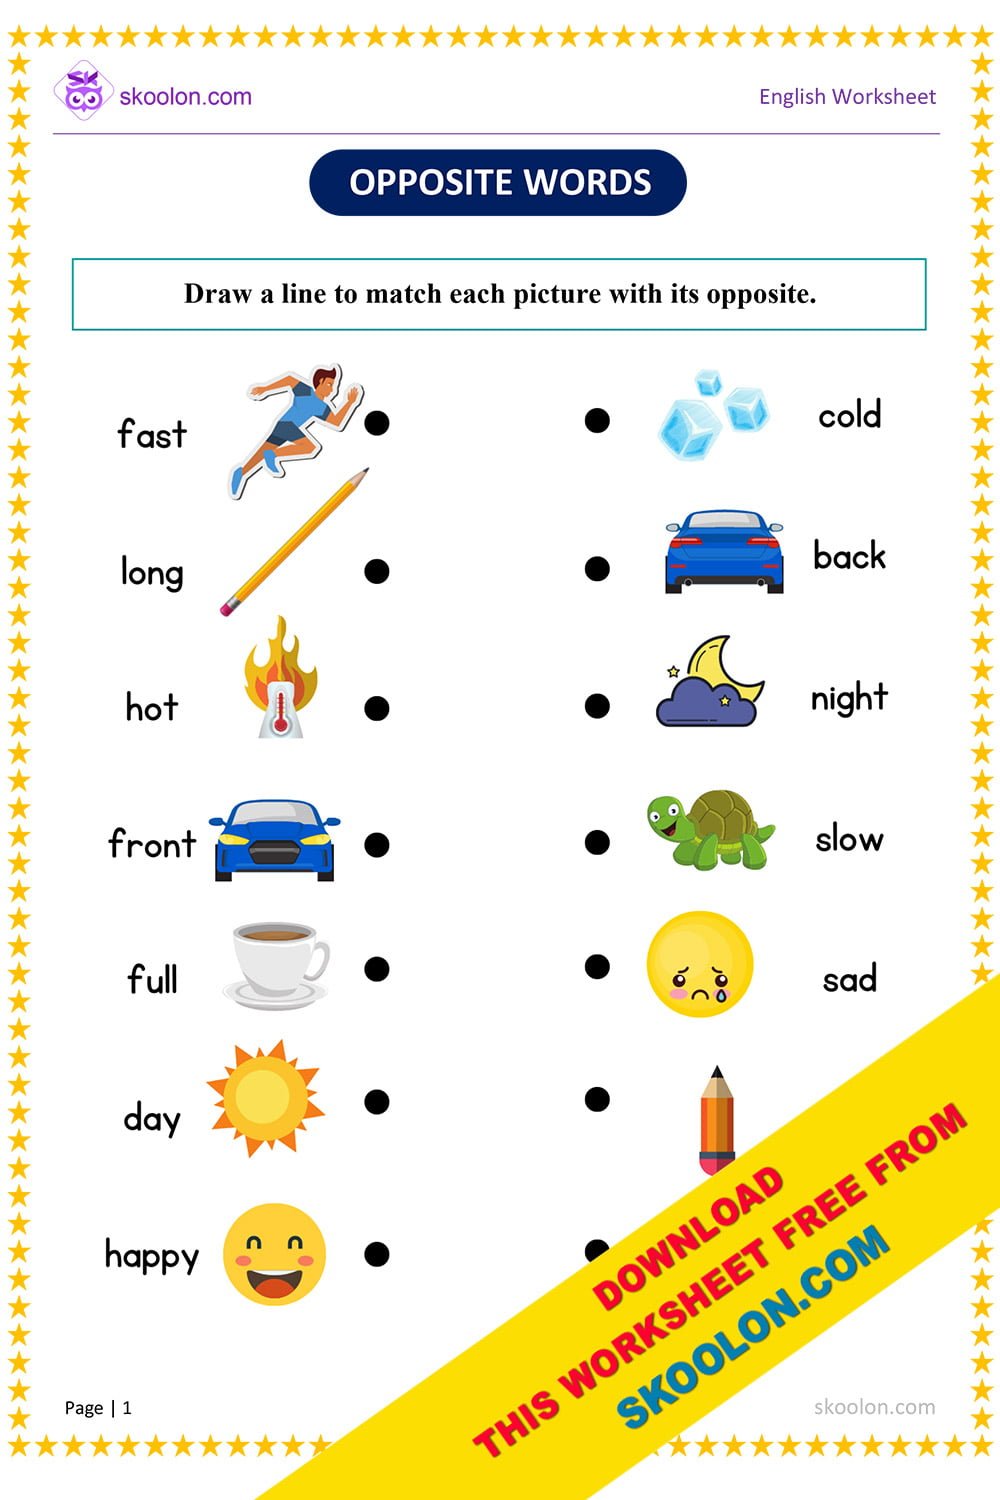 Opposite Words Worksheet For Class 3 With Answers